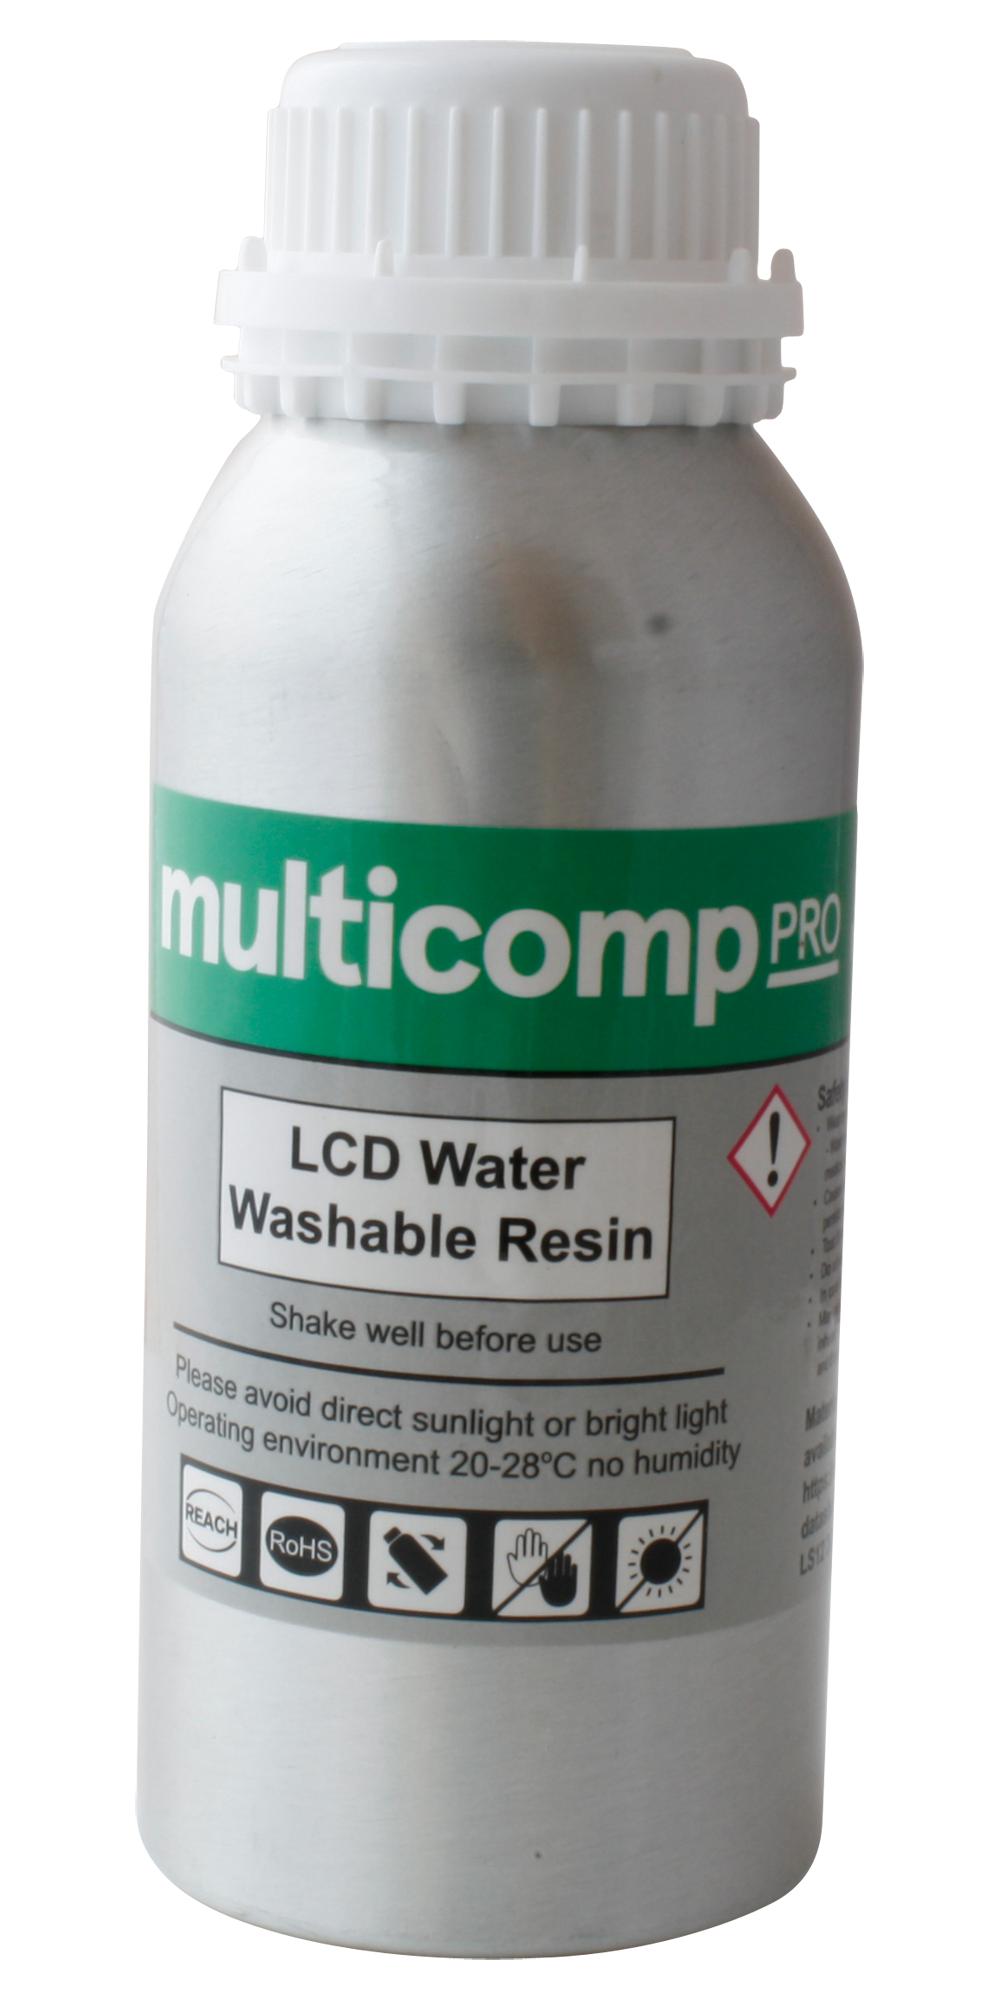 MP004401 LCD WATER WASHABLE RESIN, WHITE, 500G MULTICOMP PRO